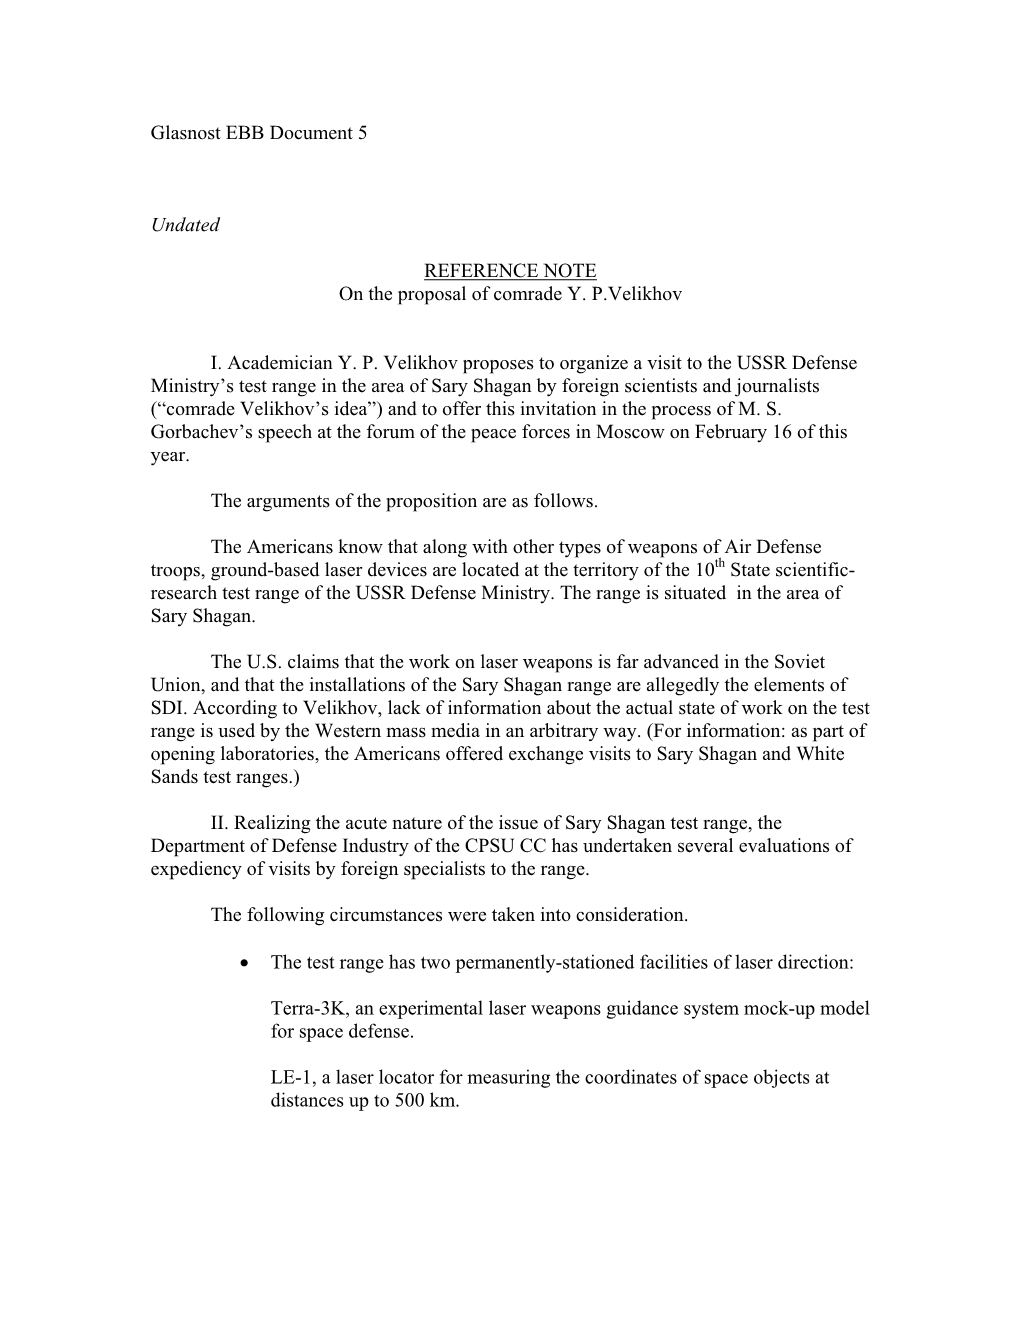 Glasnost EBB Document 5 Undated REFERENCE NOTE on the Proposal of Comrade Y. P.Velikhov I. Academician Y. P. Velikhov Proposes